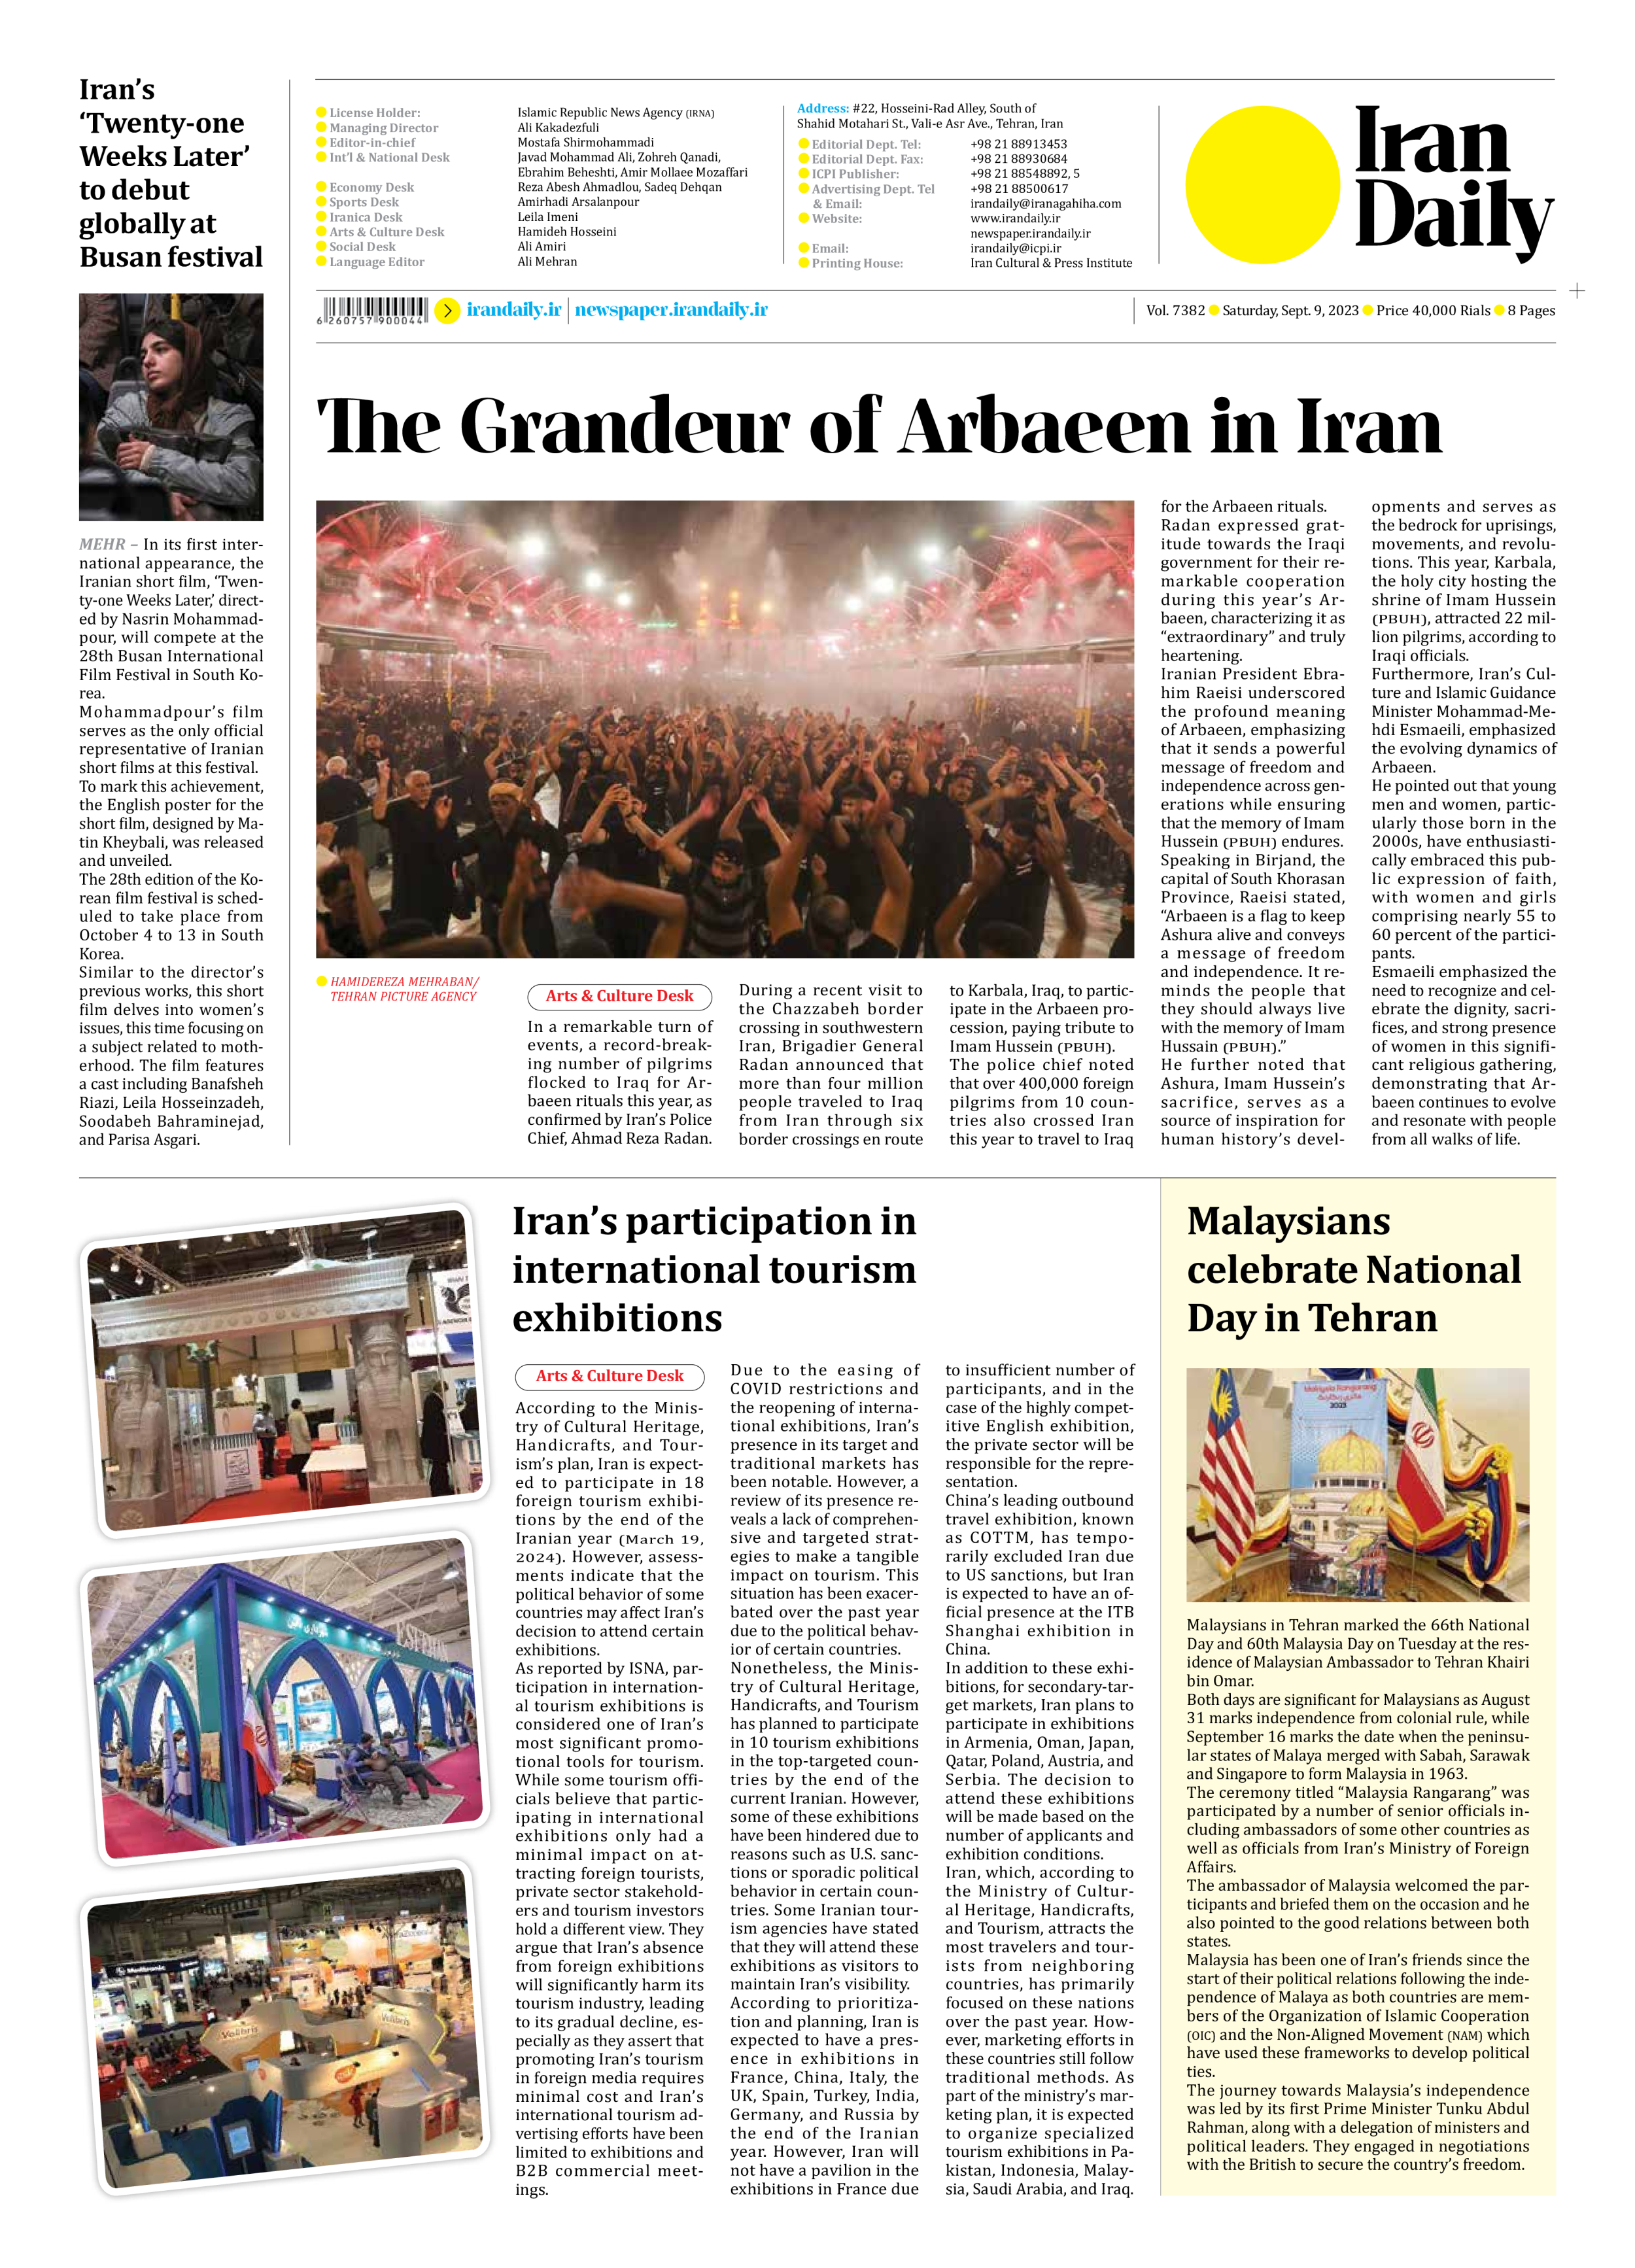 Iran Daily - Number Seven Thousand Three Hundred and Eighty Two - 09 September 2023 - Page 8